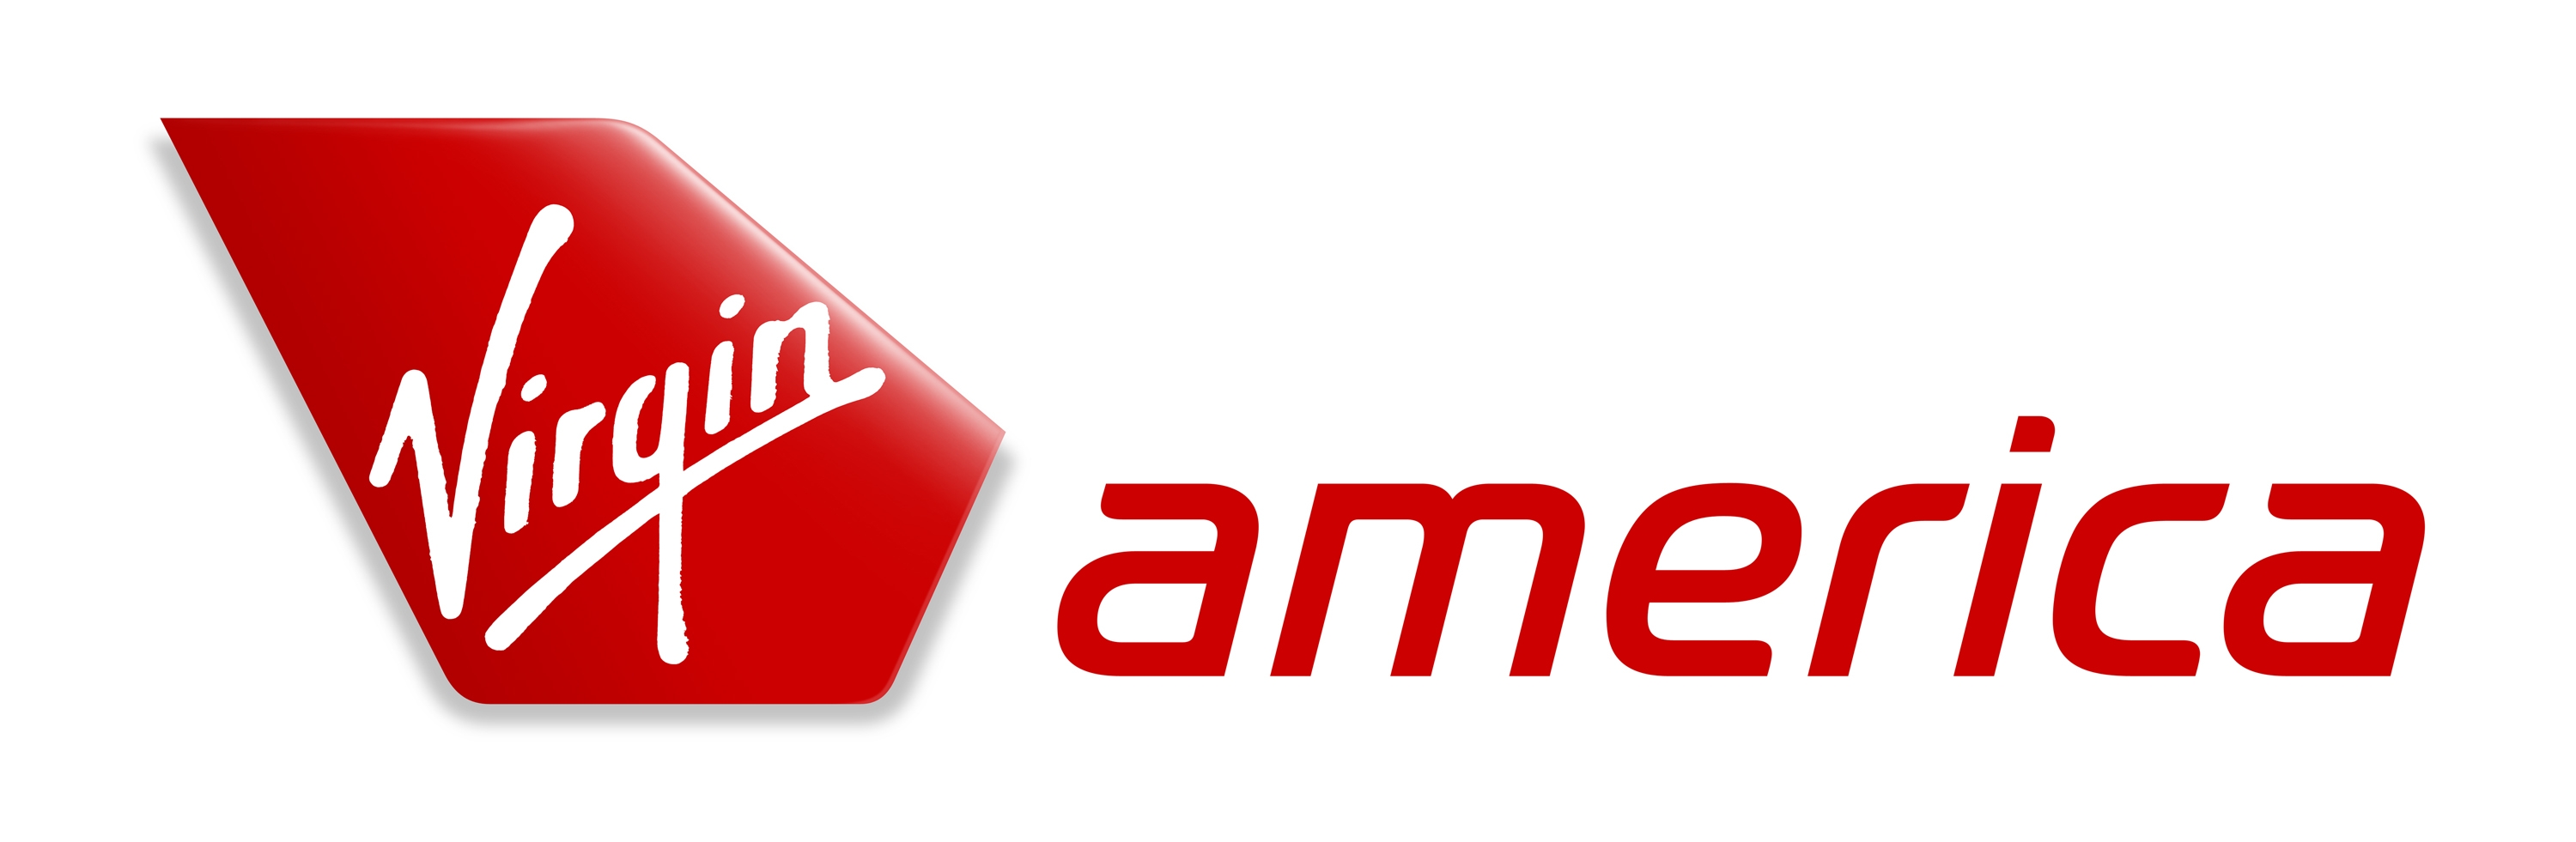 a red logo with white text